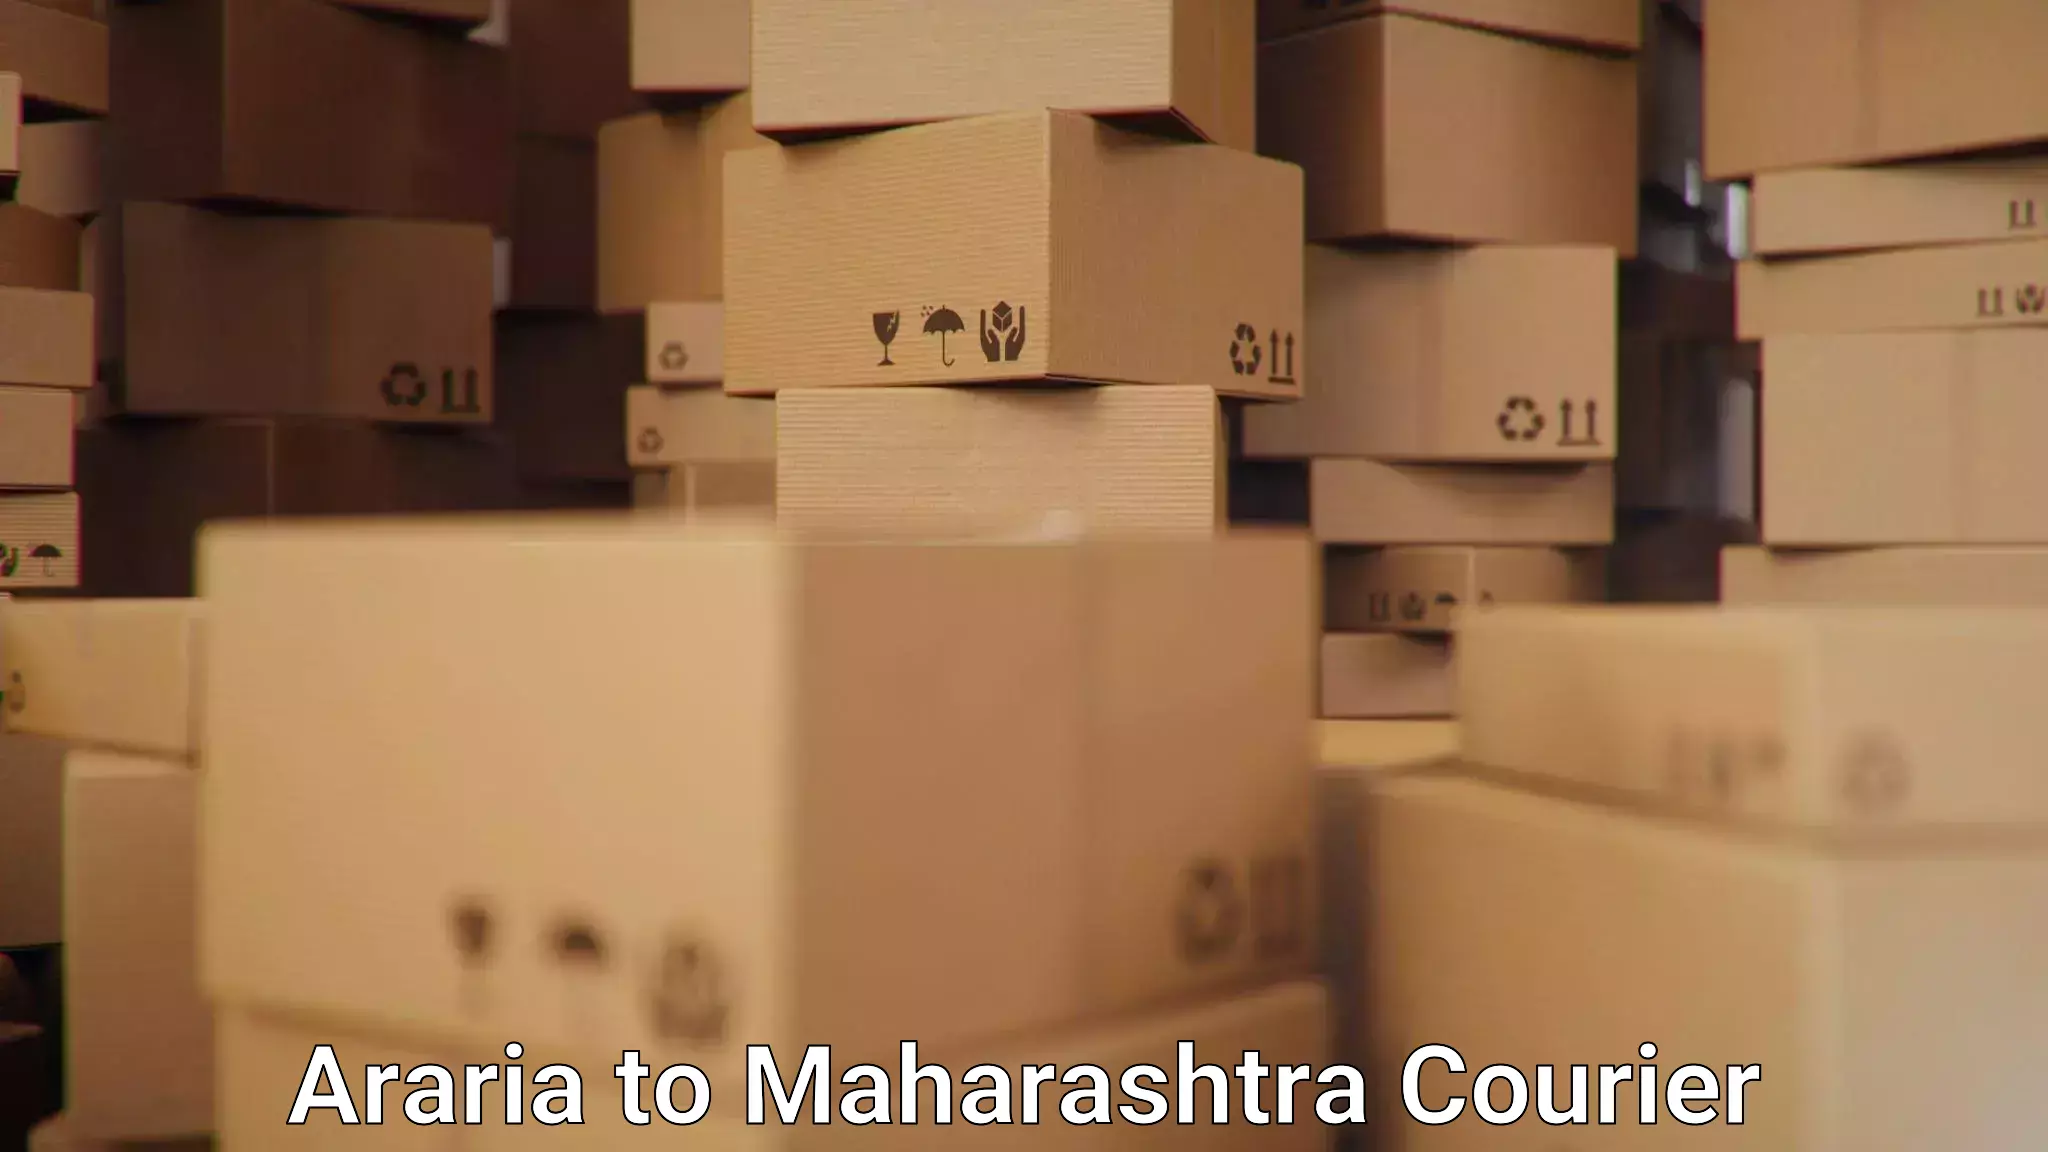 Air courier services in Araria to Raigarh Maharashtra